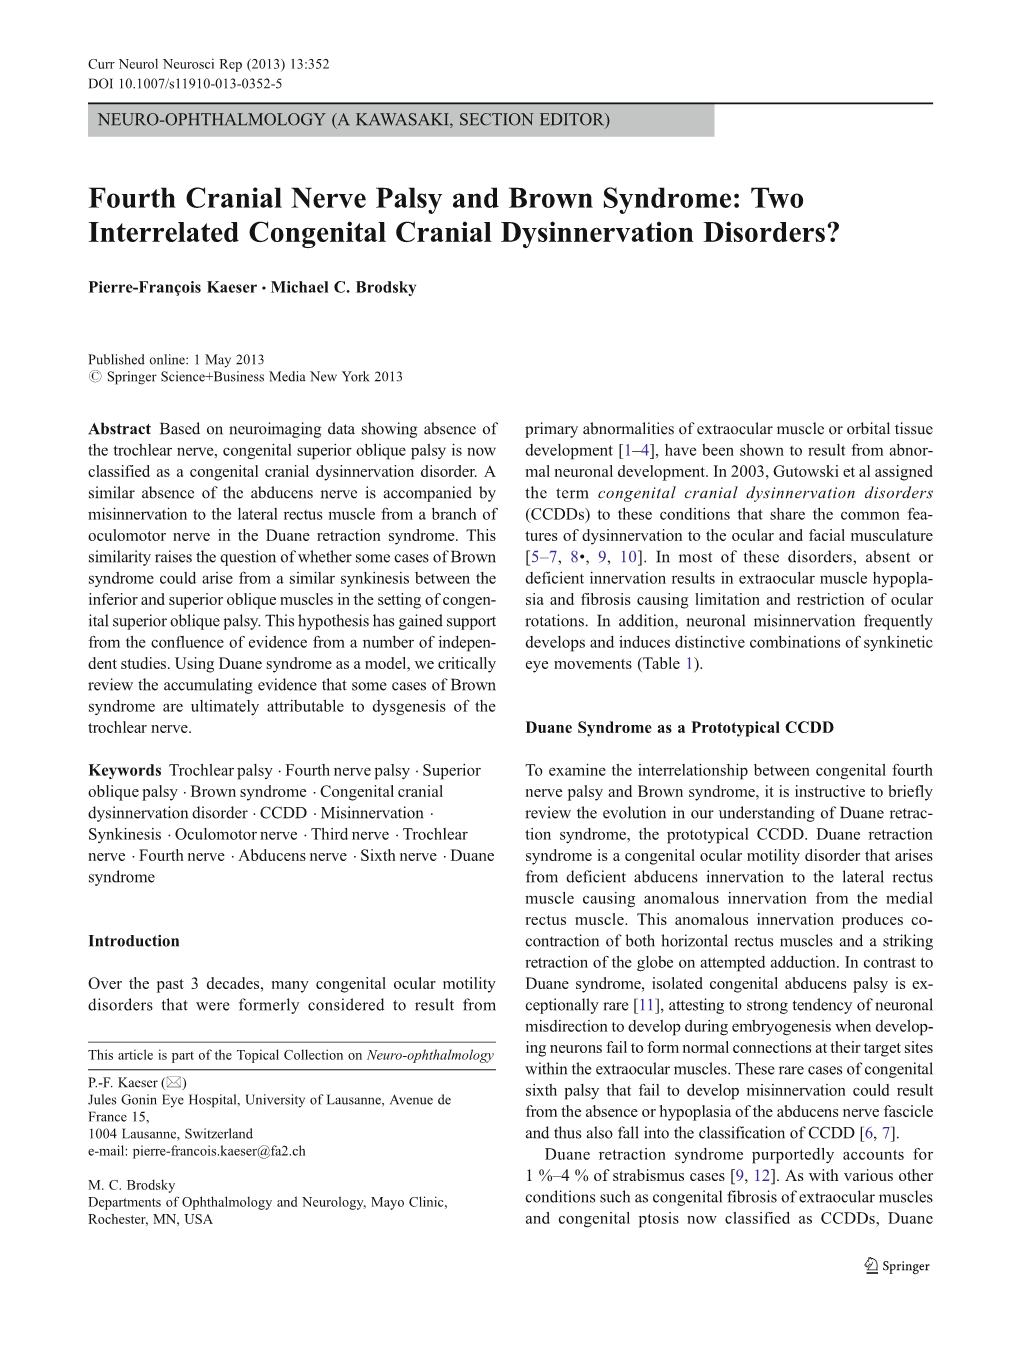 Fourth Cranial Nerve Palsy and Brown Syndrome: Two Interrelated Congenital Cranial Dysinnervation Disorders?